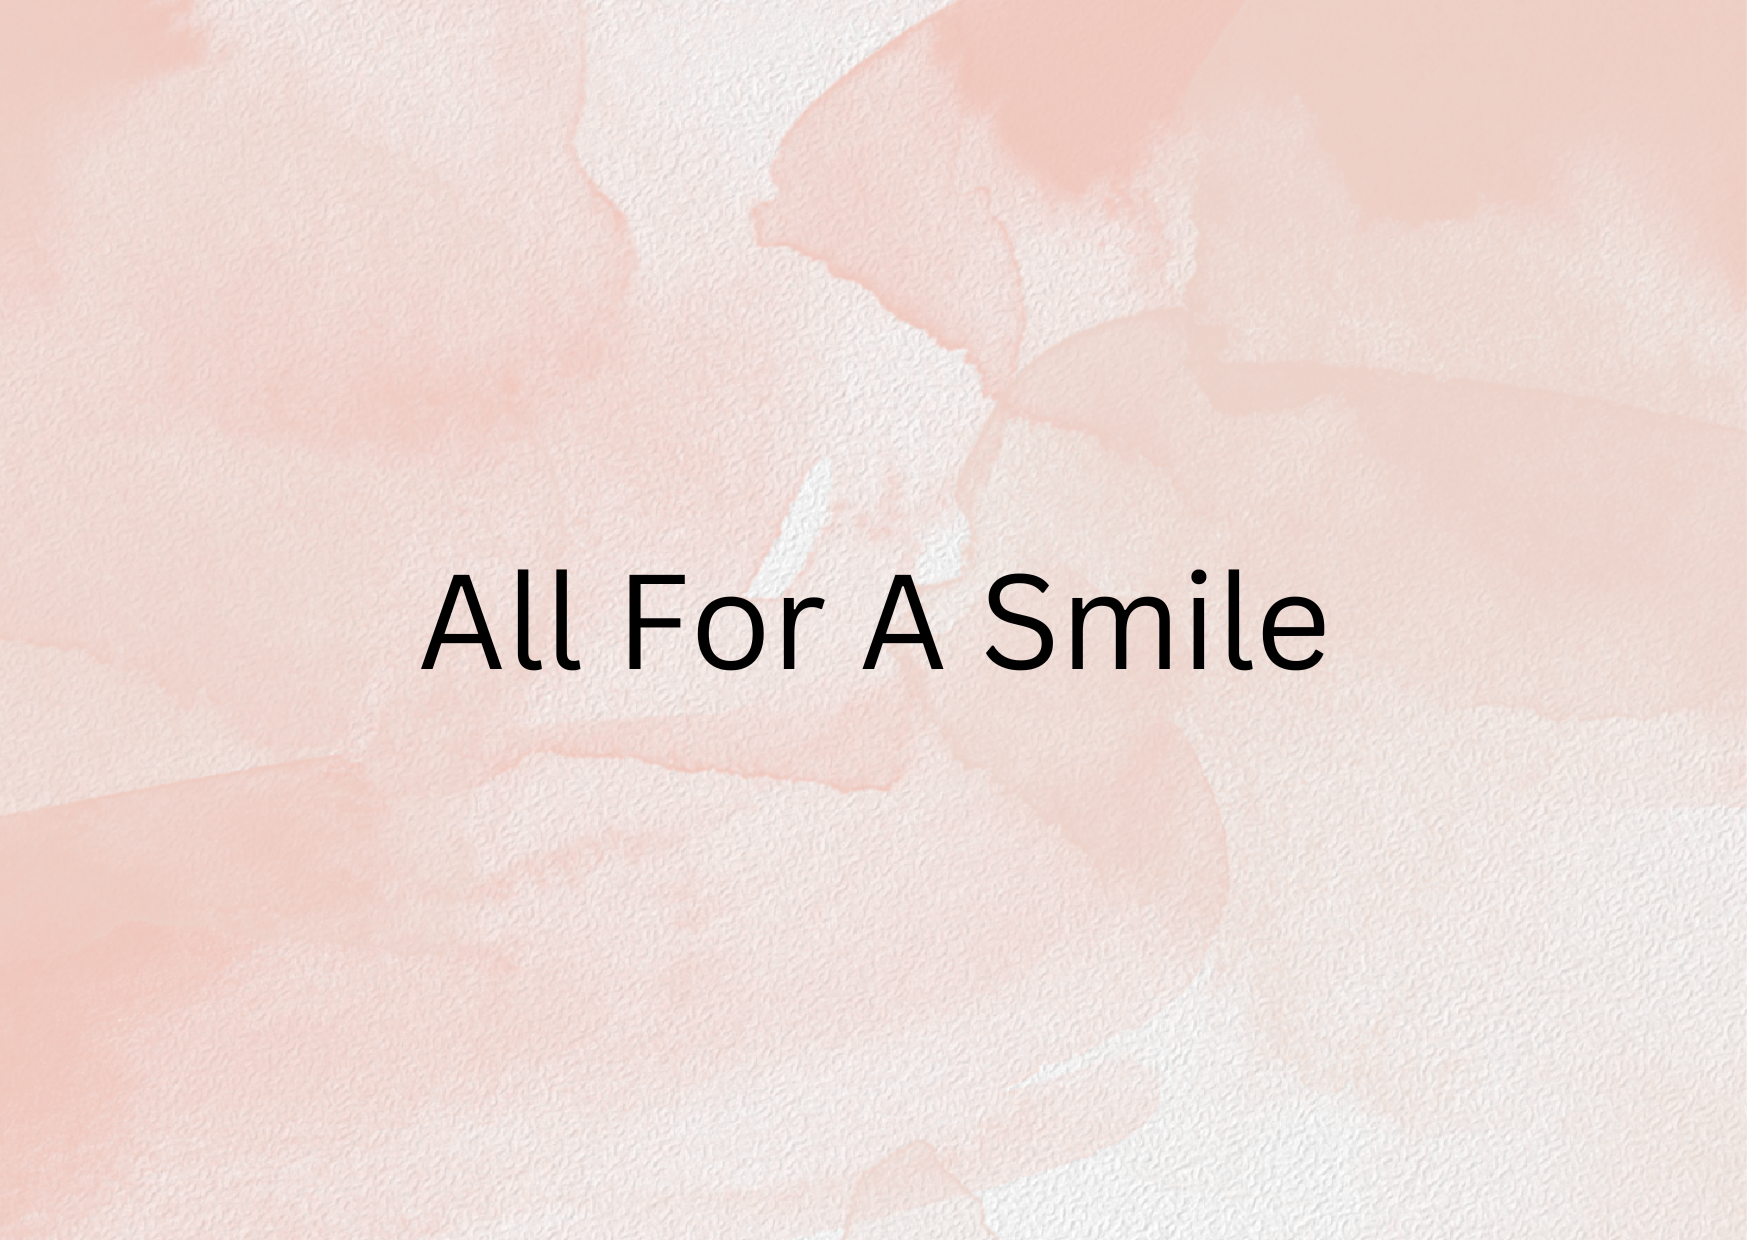 All For A Smile,   